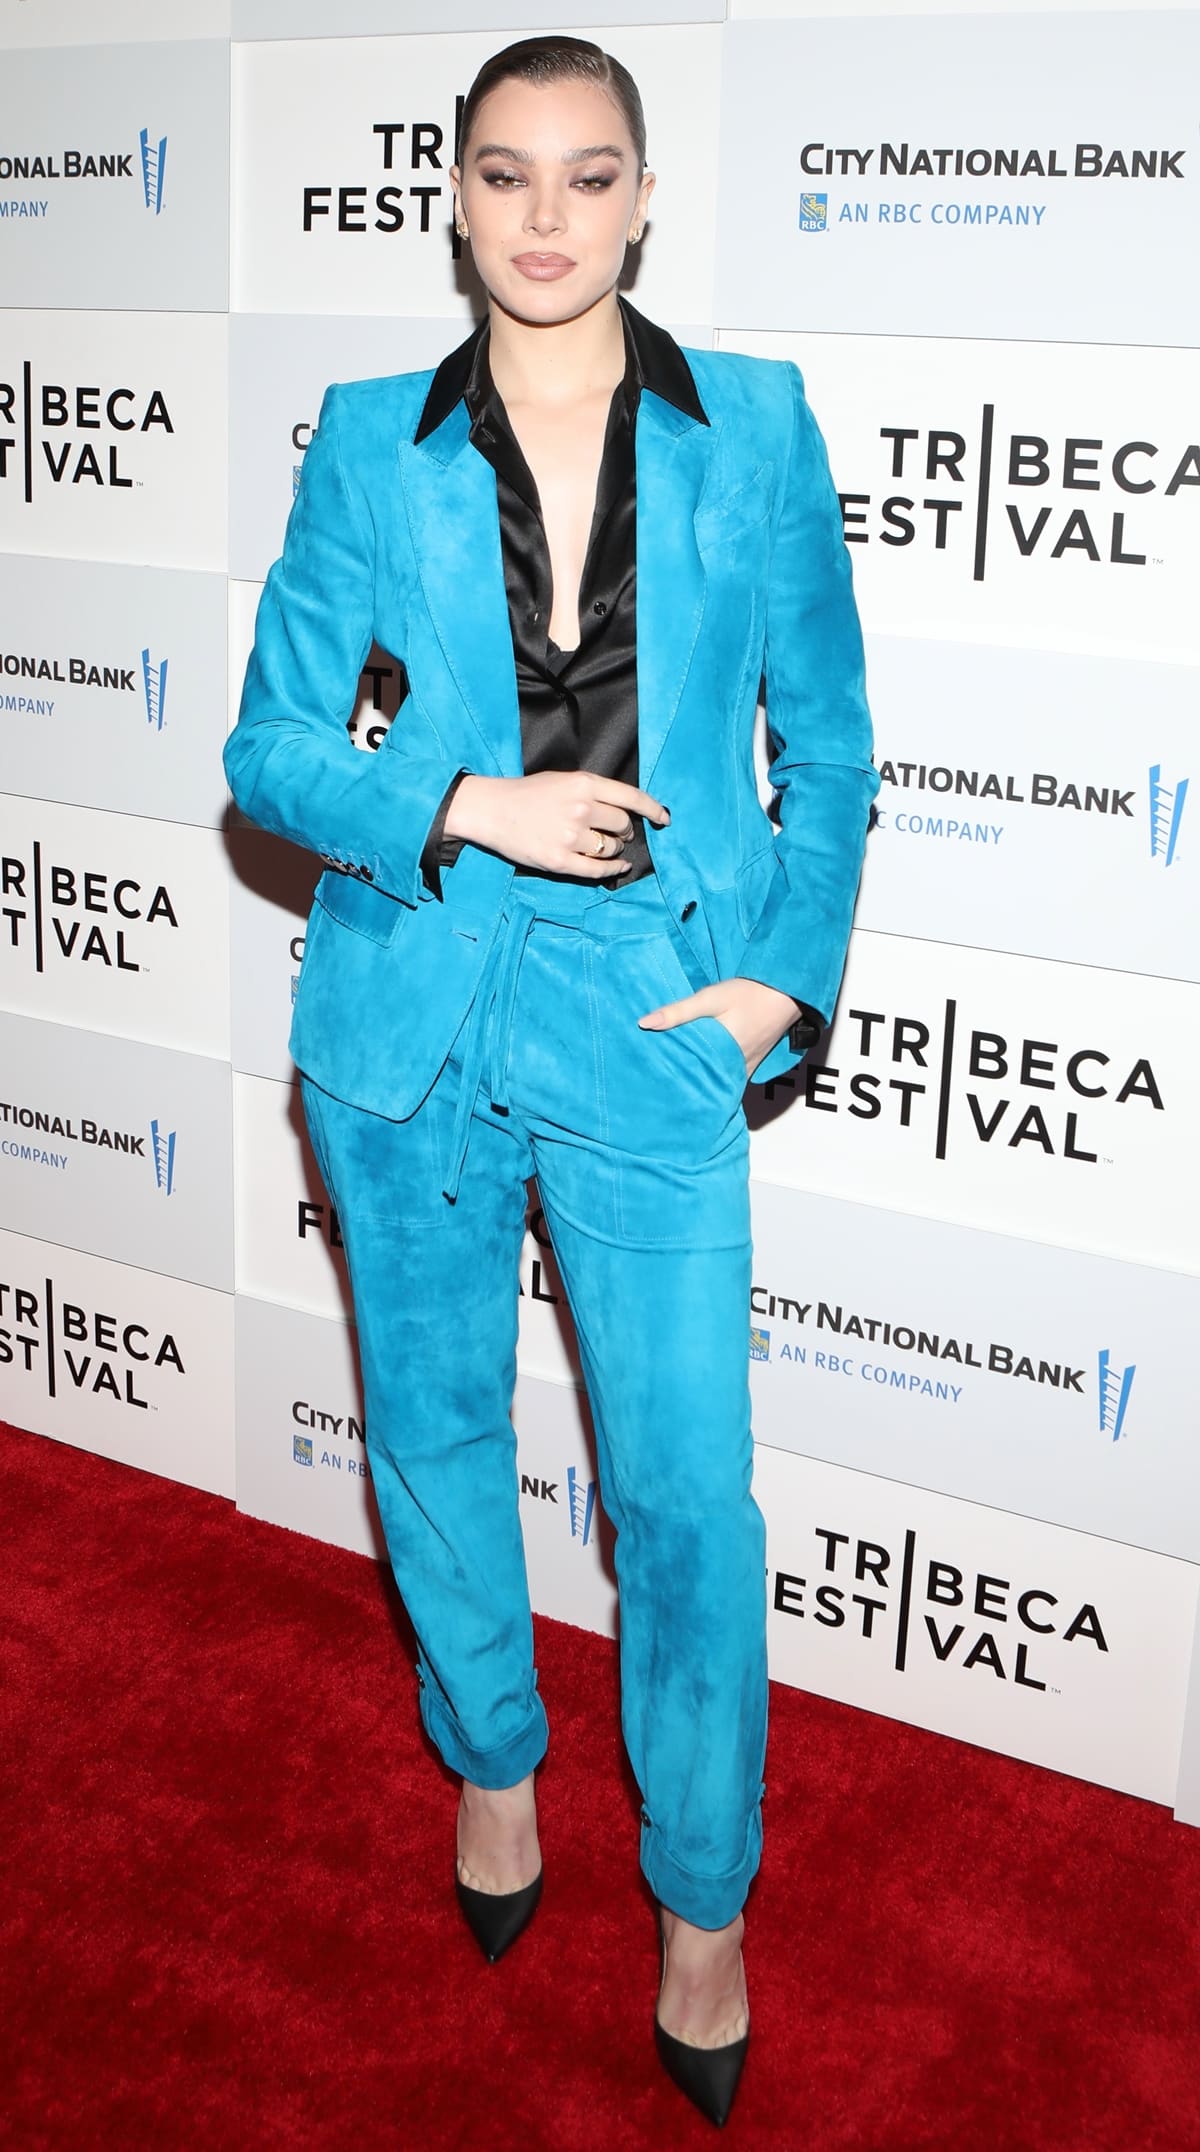 Hailee Steinfeld stood tall at 5 feet 6 ¼ inches (168.3 cm) as she dazzled in a teal suede suit by Tom Ford paired with a black silk button-up and matching pointy-toe pumps